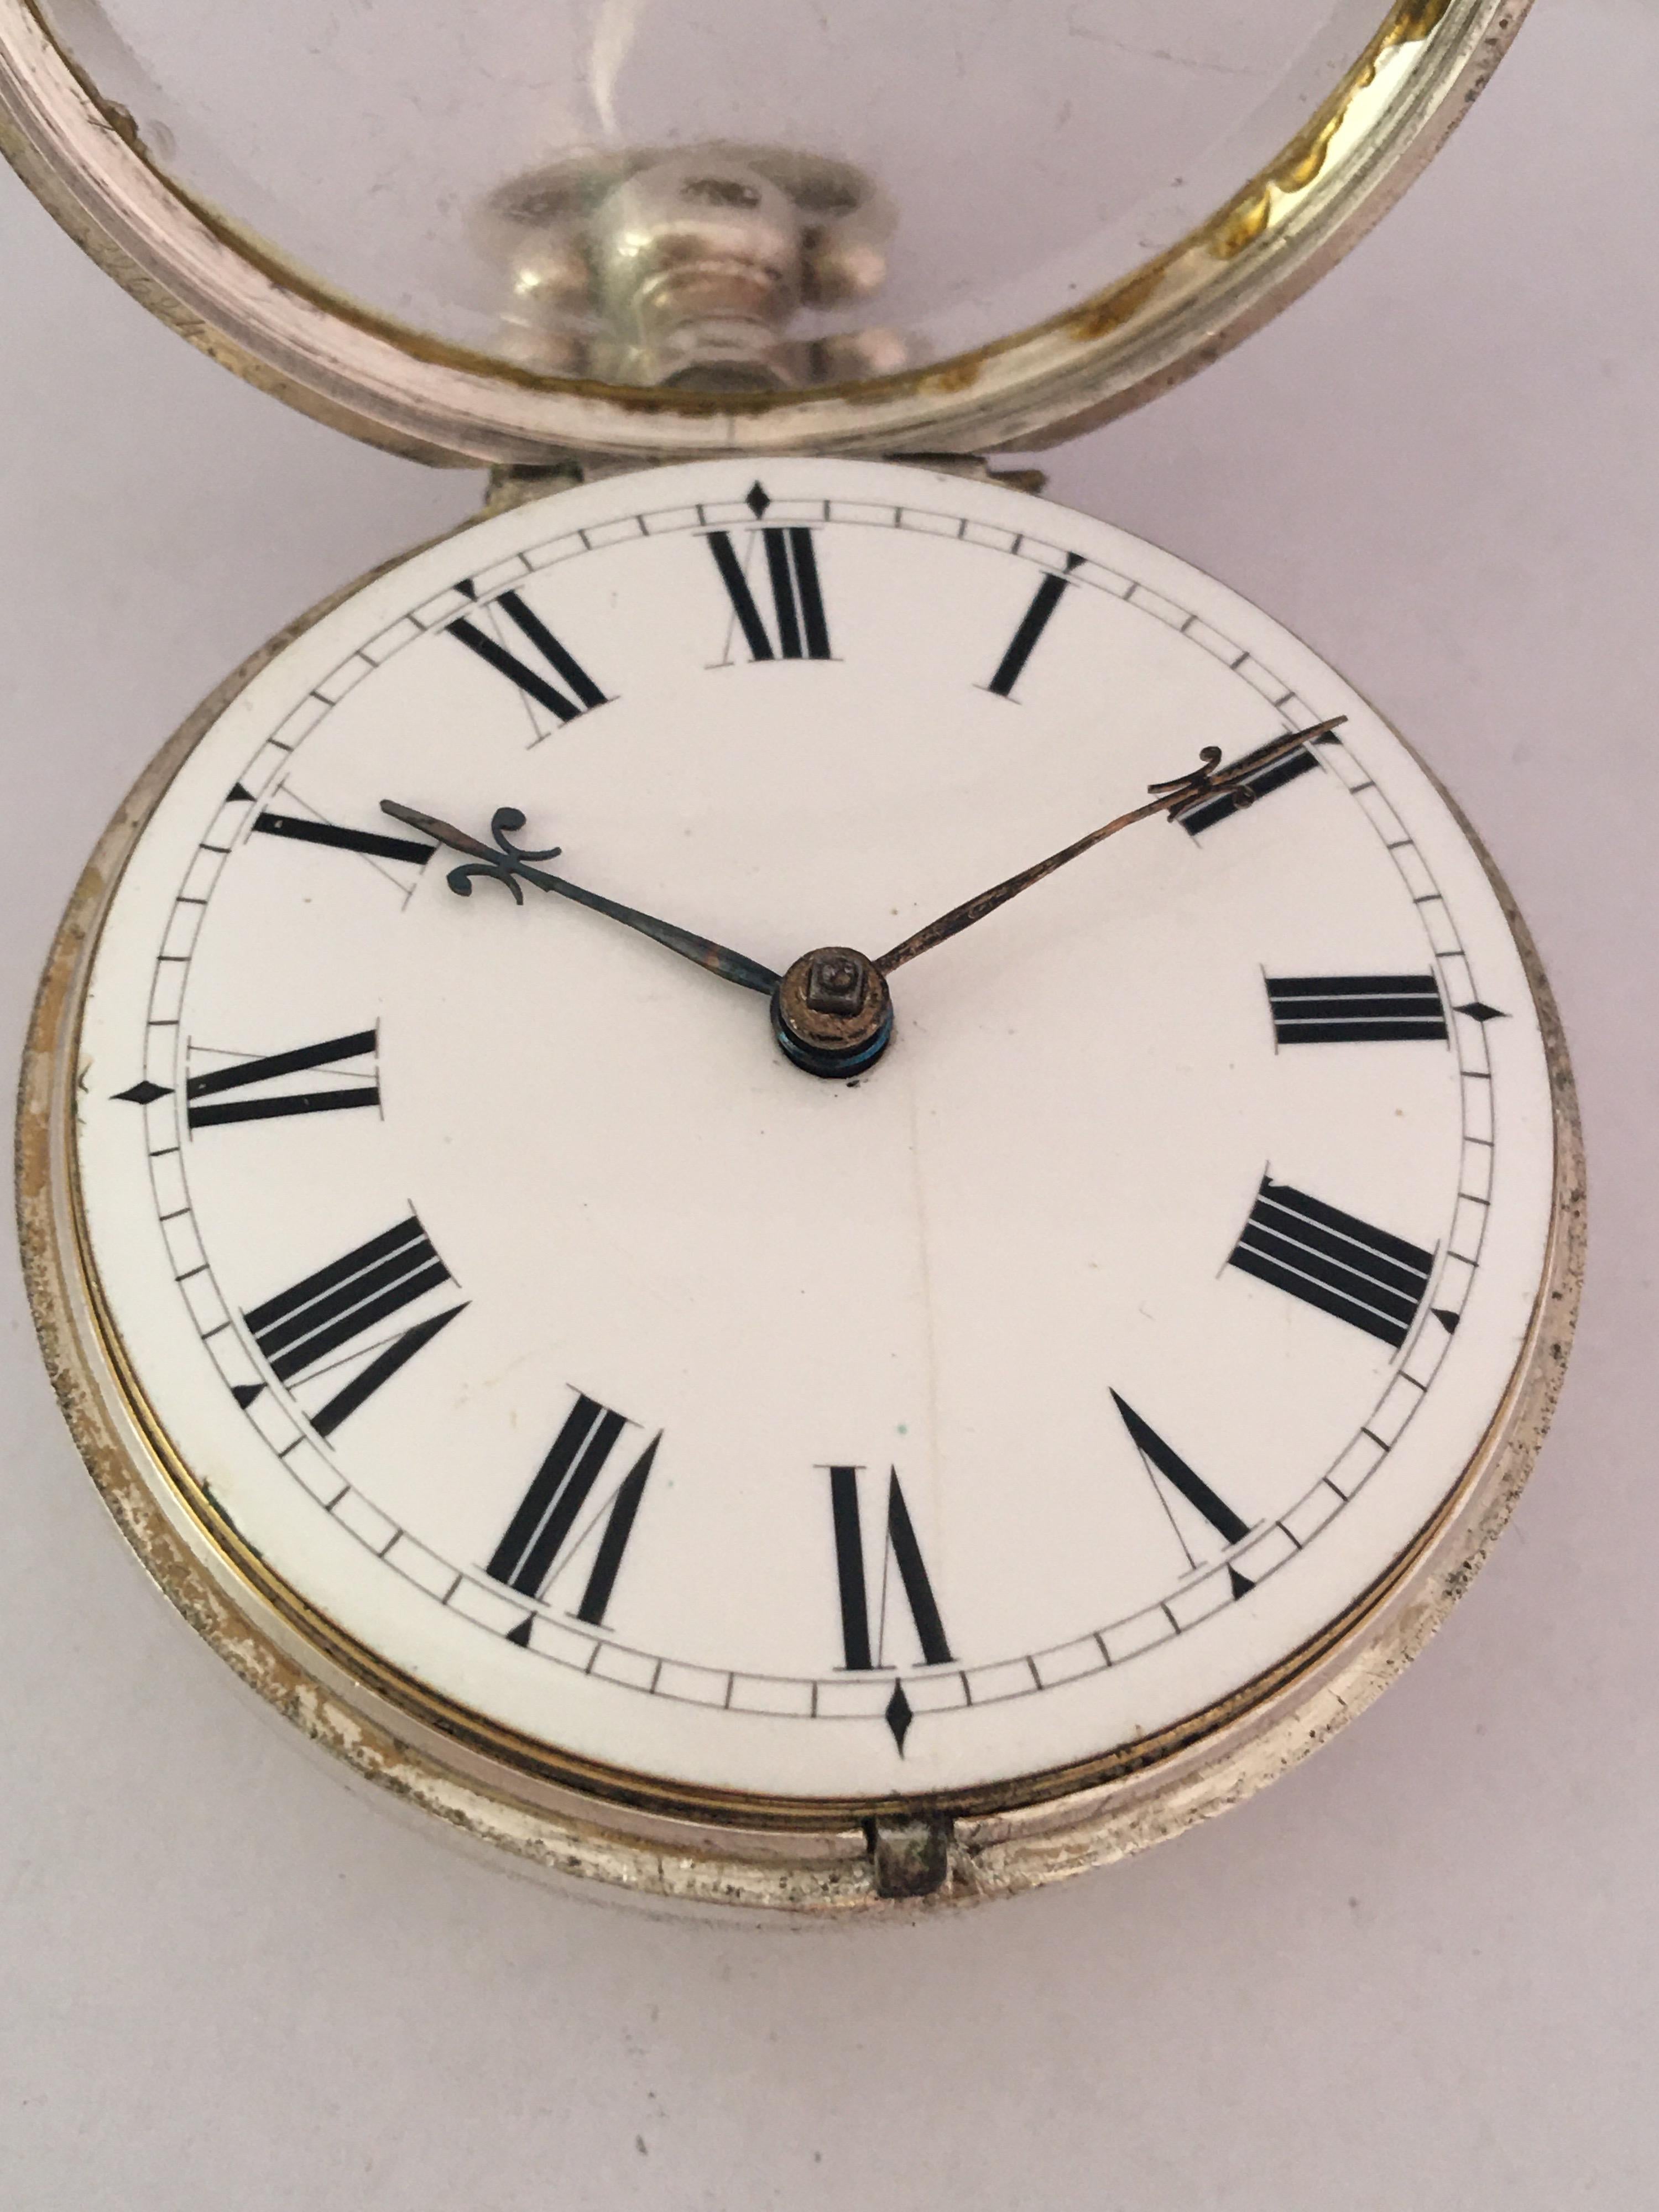 Rare and Early English Silver Pair of Cased Verge Fusee Pocket Watch For Sale 3